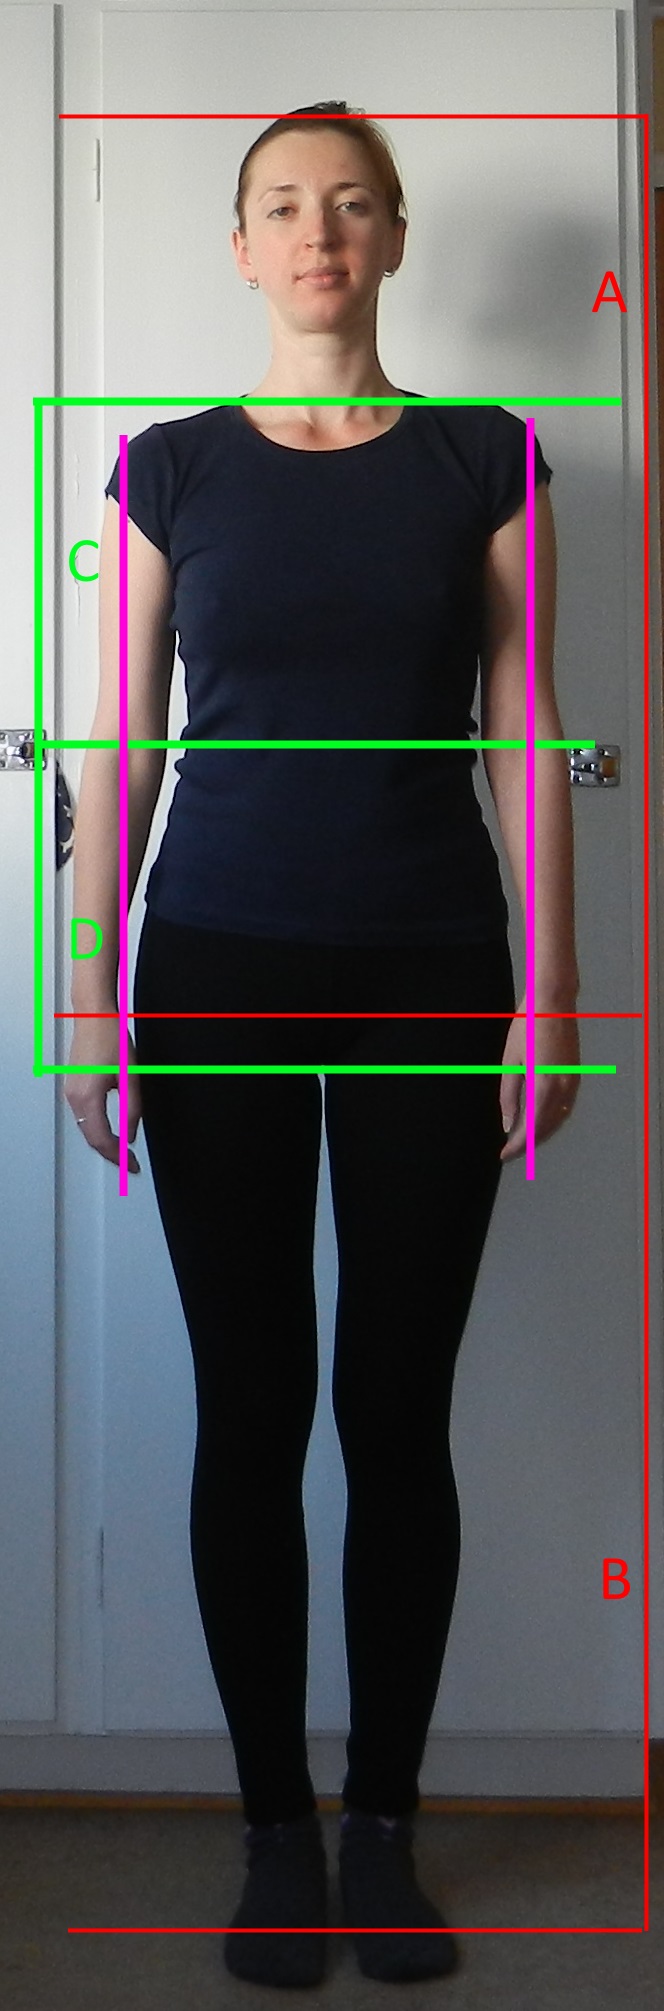 https://blog.mysteries-of-style.com/wp-content/uploads/2014/09/how-to-determine-body-proportions.jpg